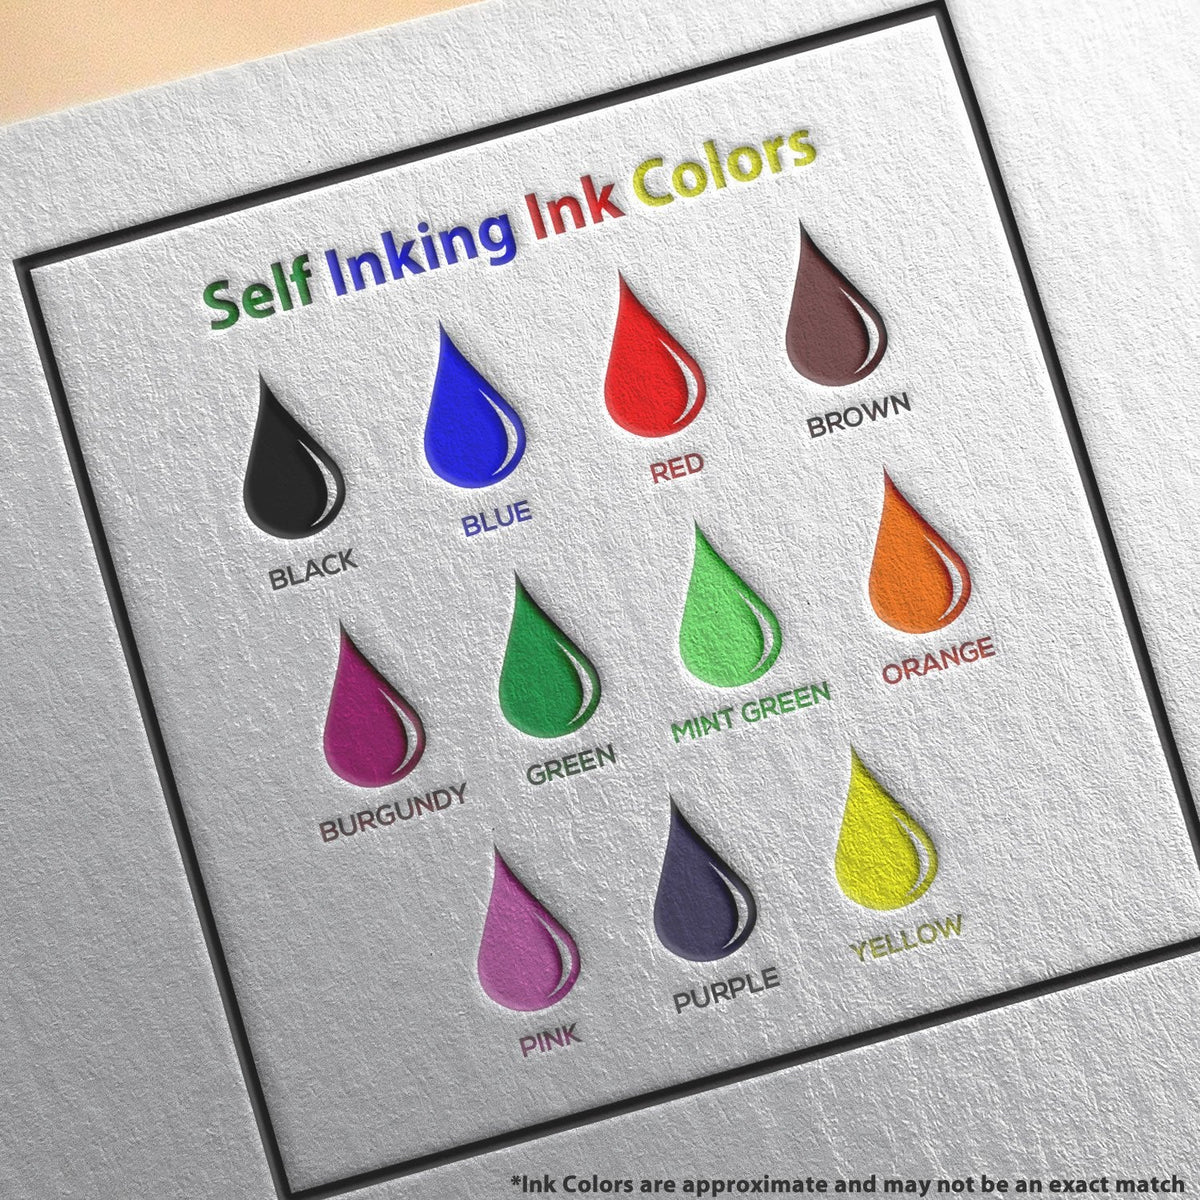 Self-Inking Priority Mail International Stamp Ink Color Options